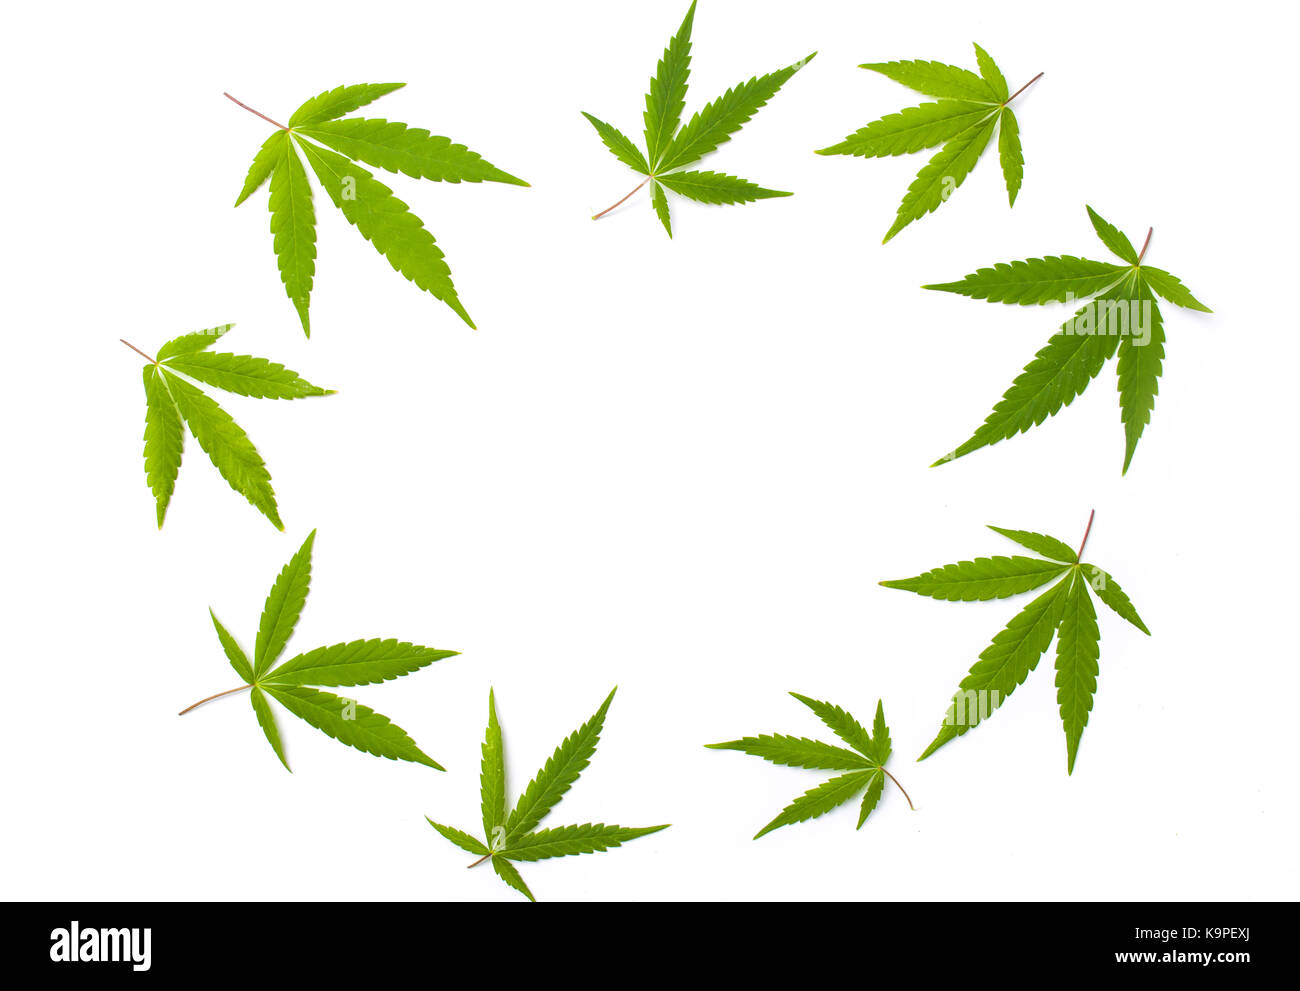 marijuana leafs isolated on white with copyspace Stock Photo